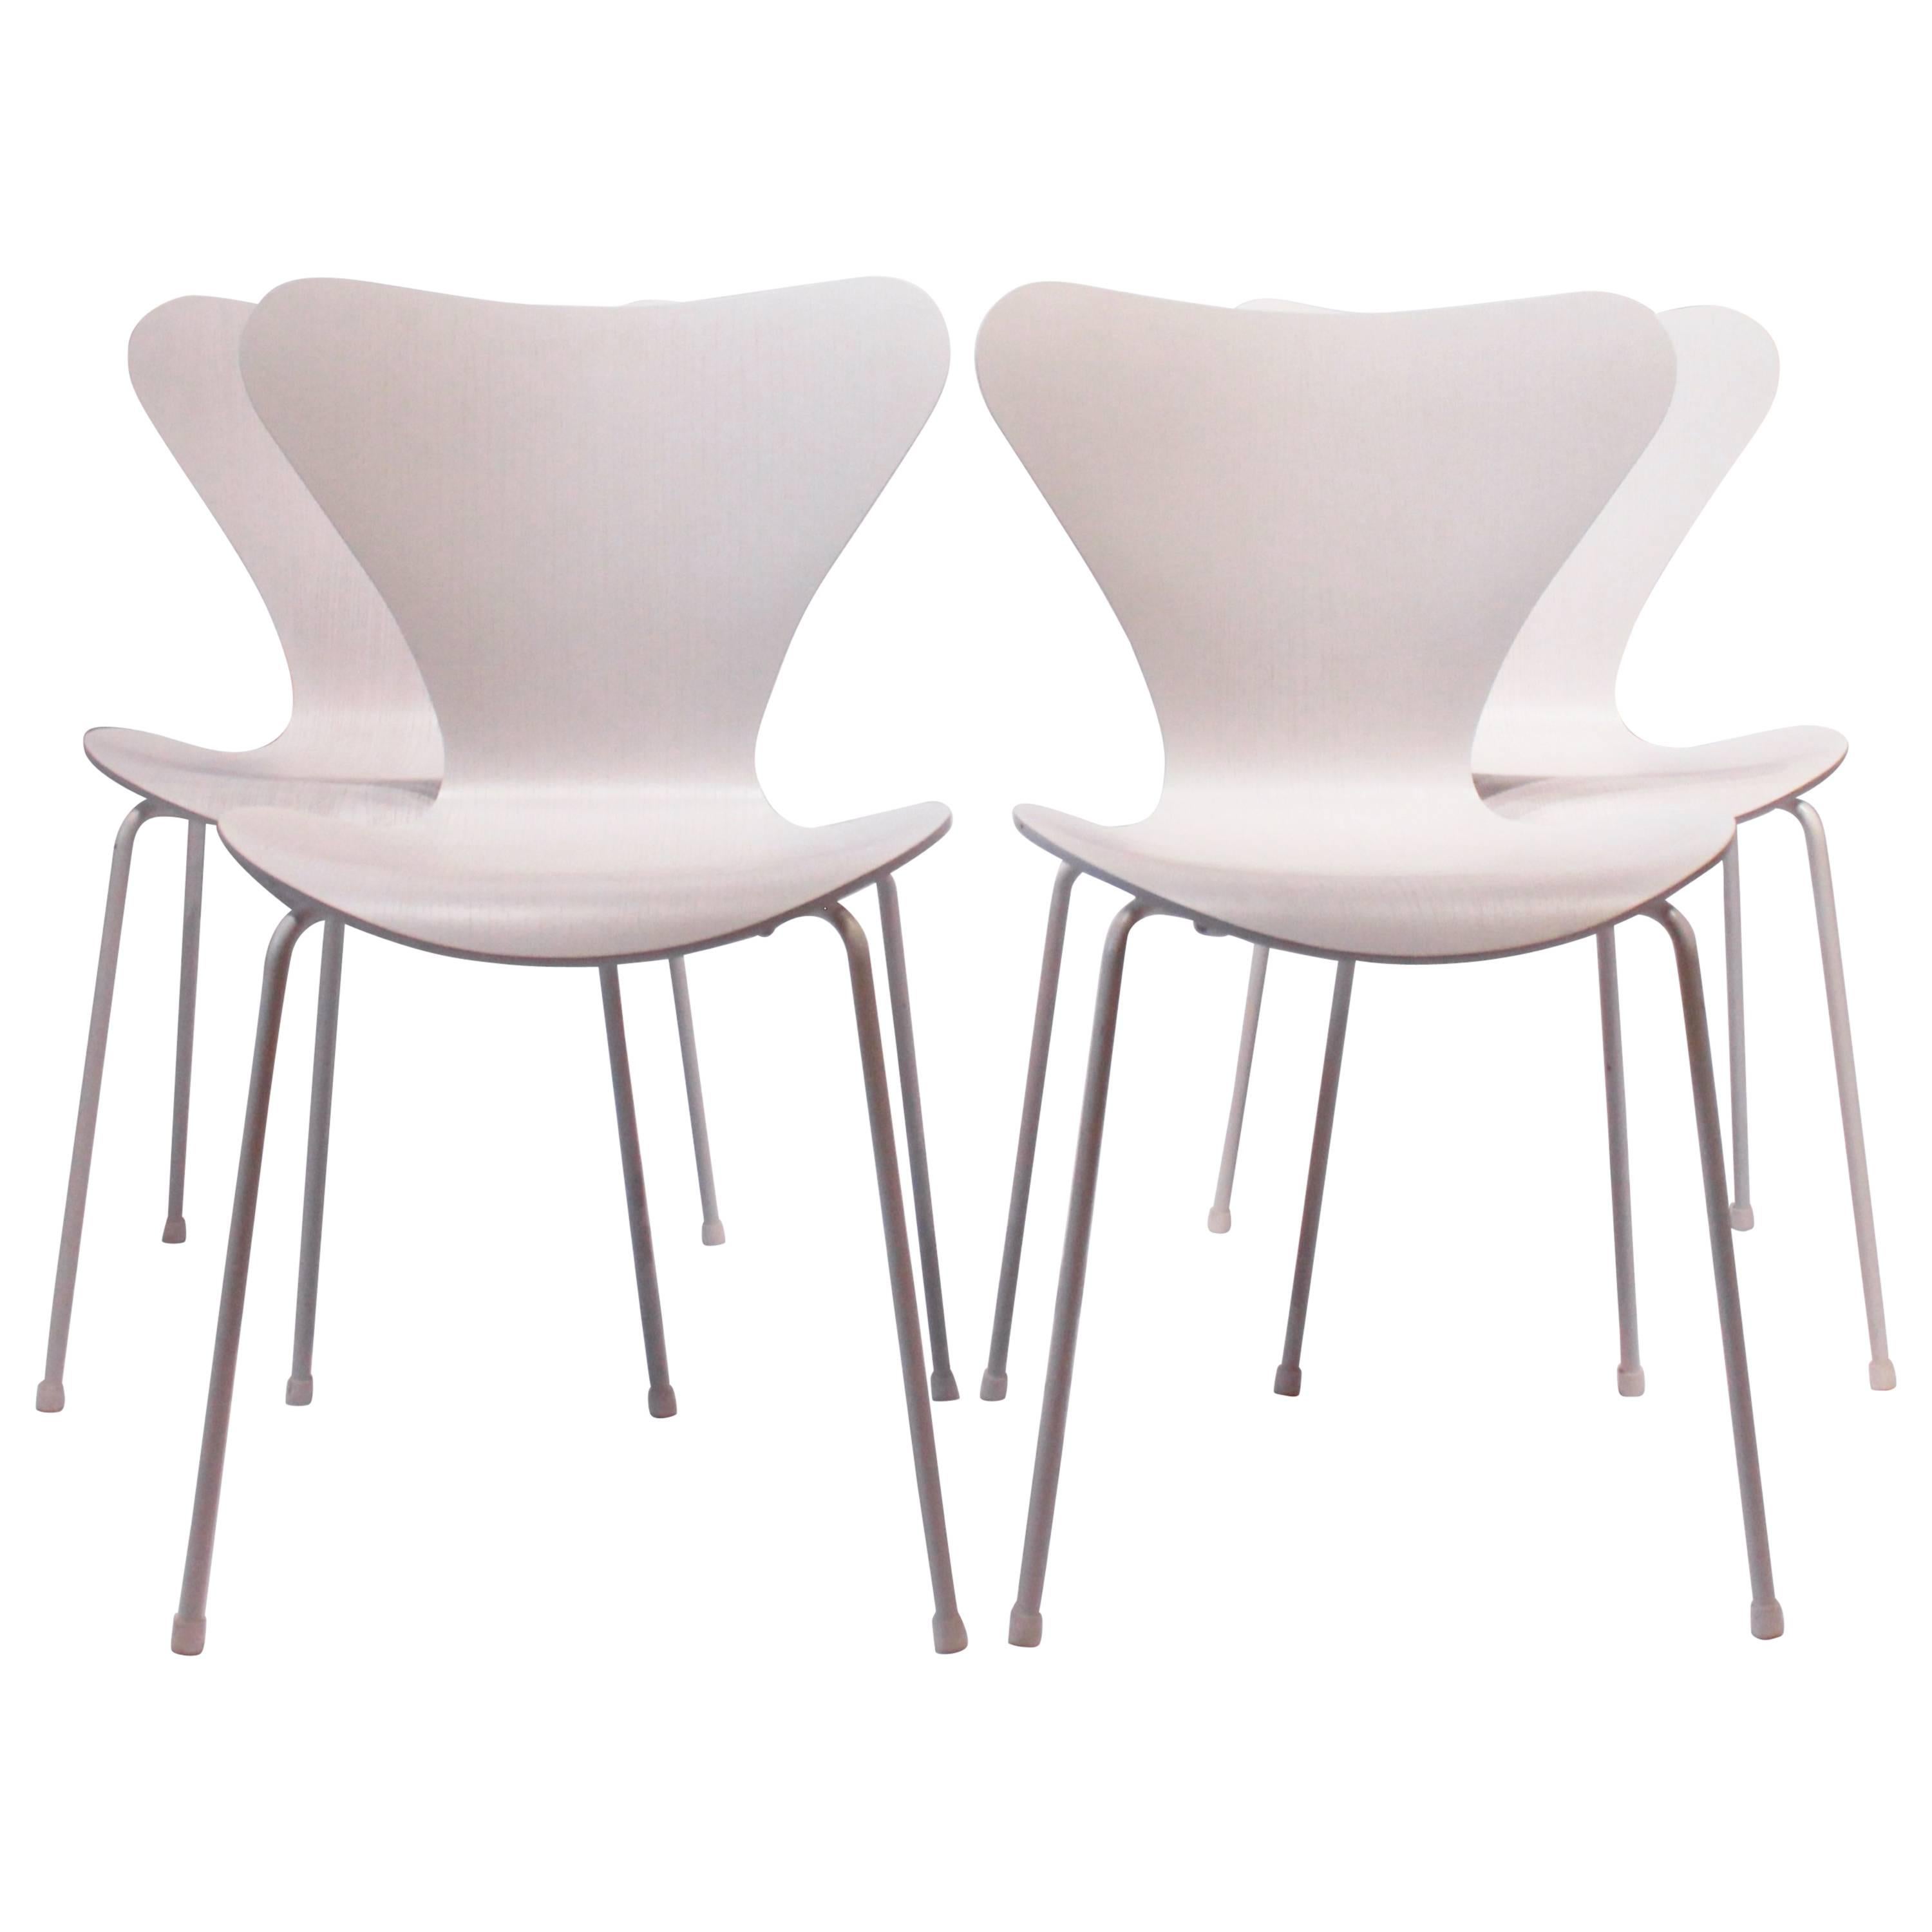 Set of Four Seven Chairs, Model 3107, Limited Edition #105 by Arne Jacobsen